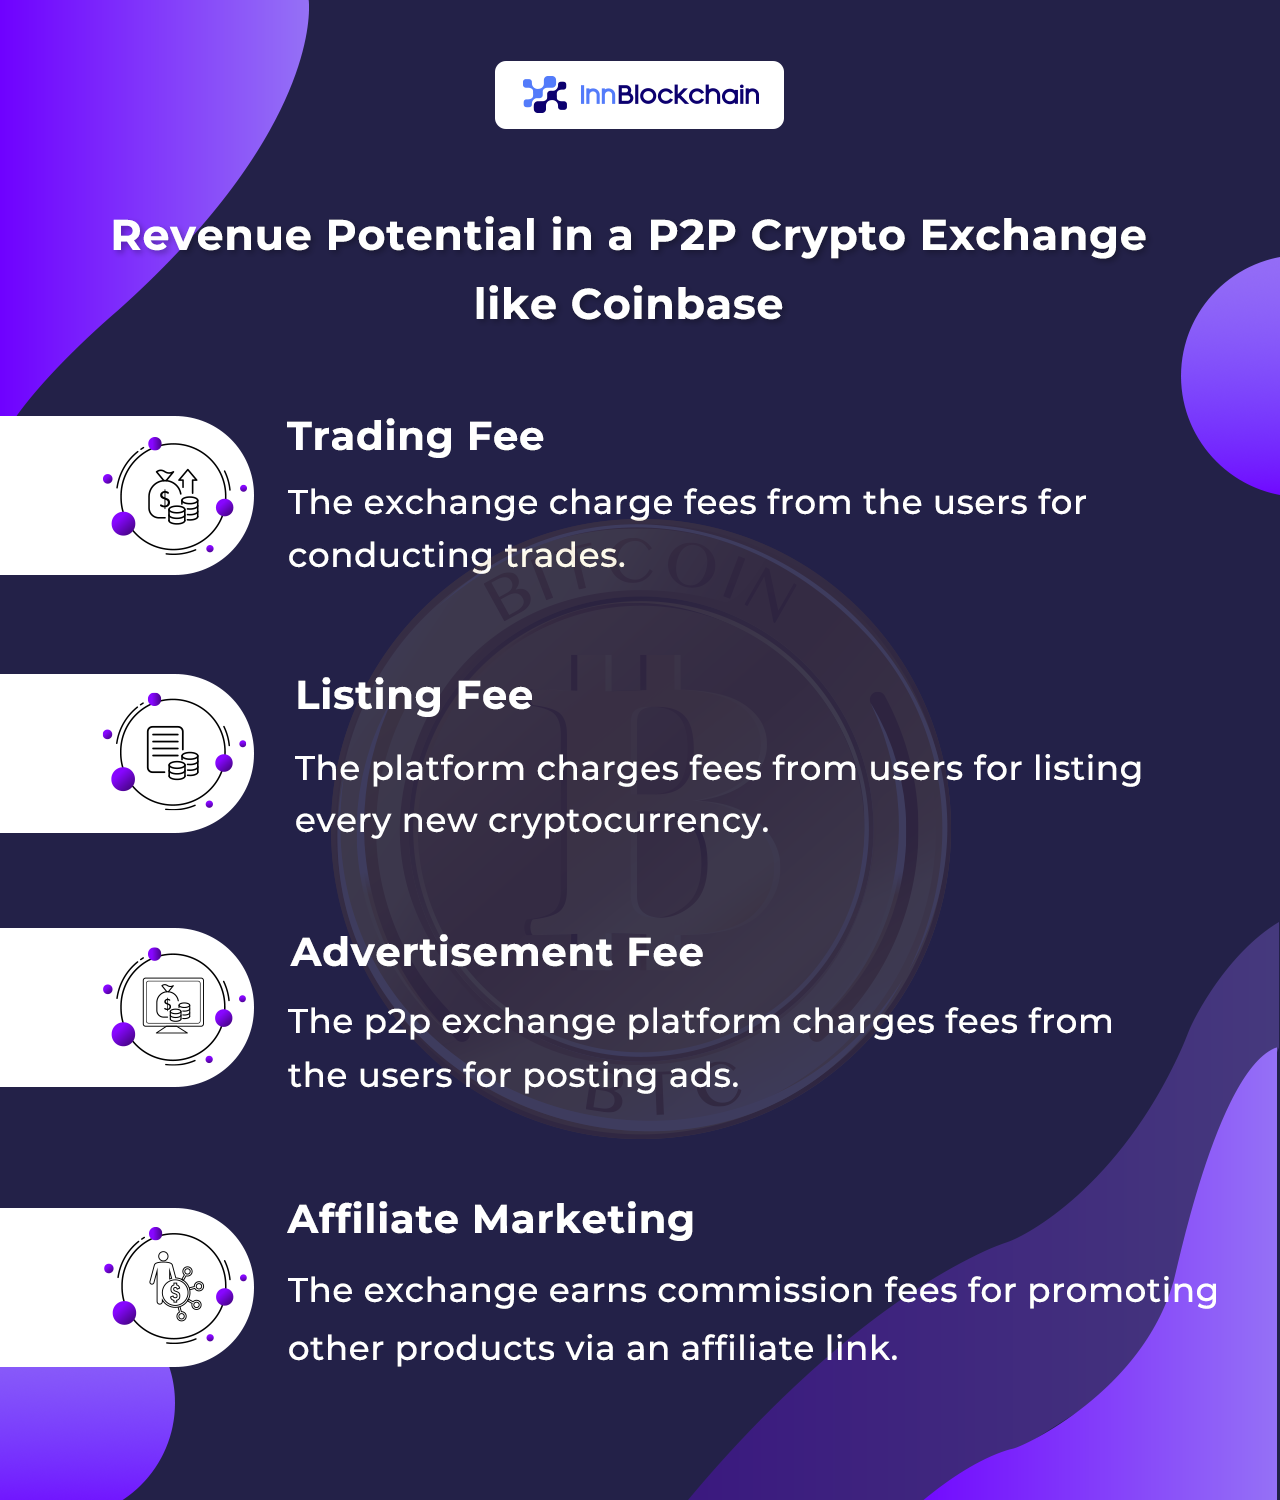 Revenue potential in p2p crypto exchange like Coinbase